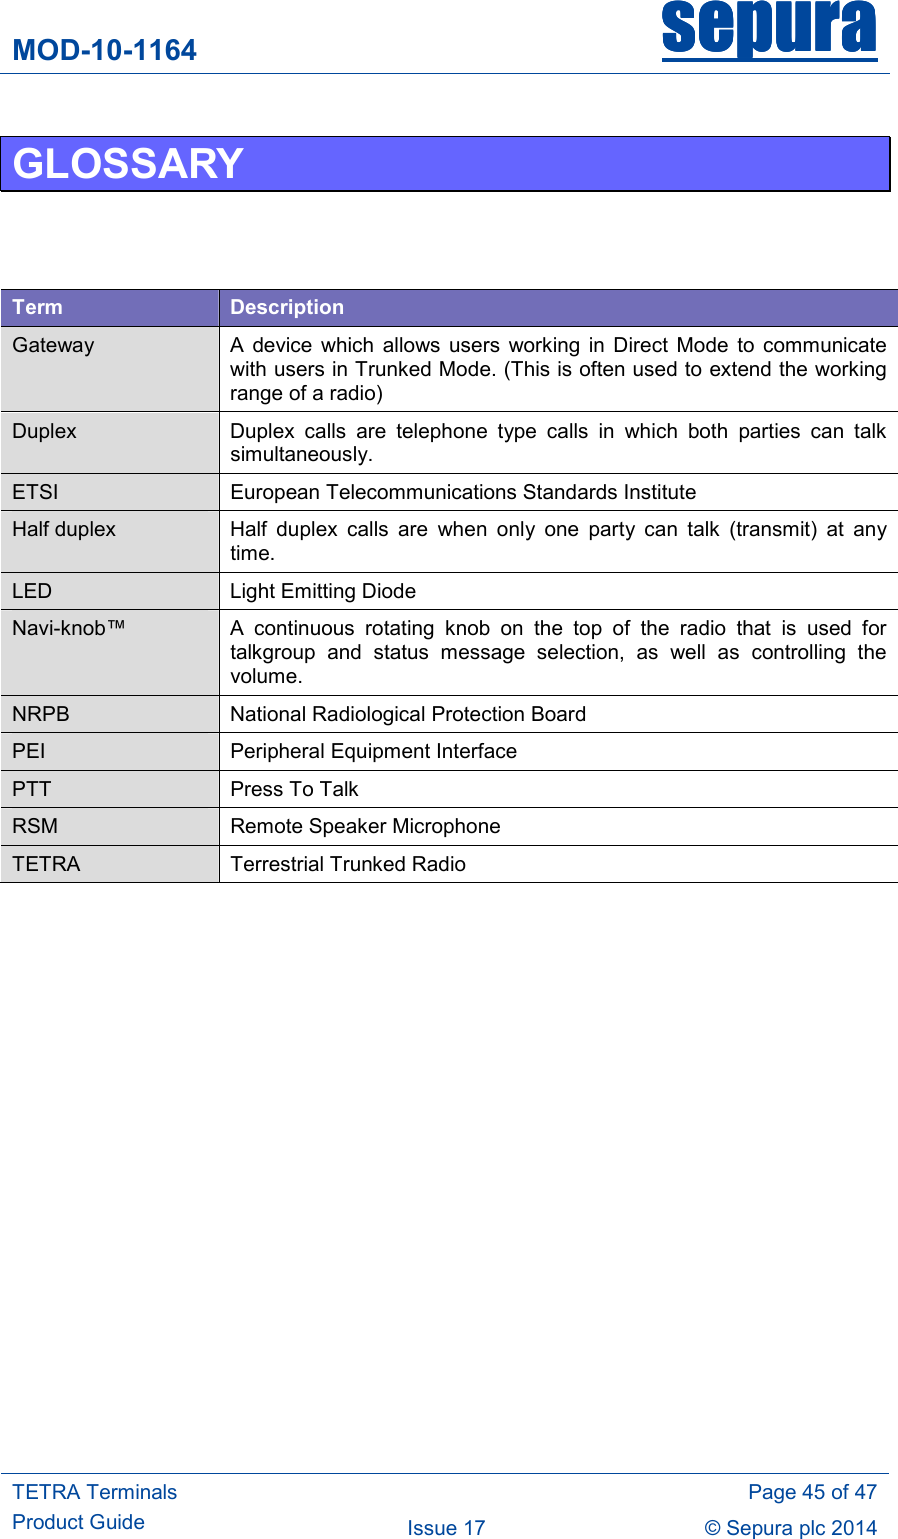 MOD-10-1164 sepurasepurasepurasepura     TETRA Terminals Product Guide   Page 45 of 47 Issue 17  © Sepura plc 2014   GLOSSARY     Term  Description Gateway  A  device  which  allows  users  working in  Direct  Mode  to  communicate with users in Trunked Mode. (This is often used to extend the working range of a radio) Duplex  Duplex  calls  are  telephone  type  calls  in  which  both  parties  can  talk simultaneously.  ETSI  European Telecommunications Standards Institute Half duplex  Half  duplex  calls  are  when  only  one  party  can  talk  (transmit)  at  any time. LED  Light Emitting Diode Navi-knob™   A  continuous  rotating  knob  on  the  top  of  the  radio  that  is  used  for talkgroup  and  status  message  selection,  as  well  as  controlling  the volume. NRPB  National Radiological Protection Board PEI  Peripheral Equipment Interface PTT  Press To Talk RSM  Remote Speaker Microphone TETRA  Terrestrial Trunked Radio     